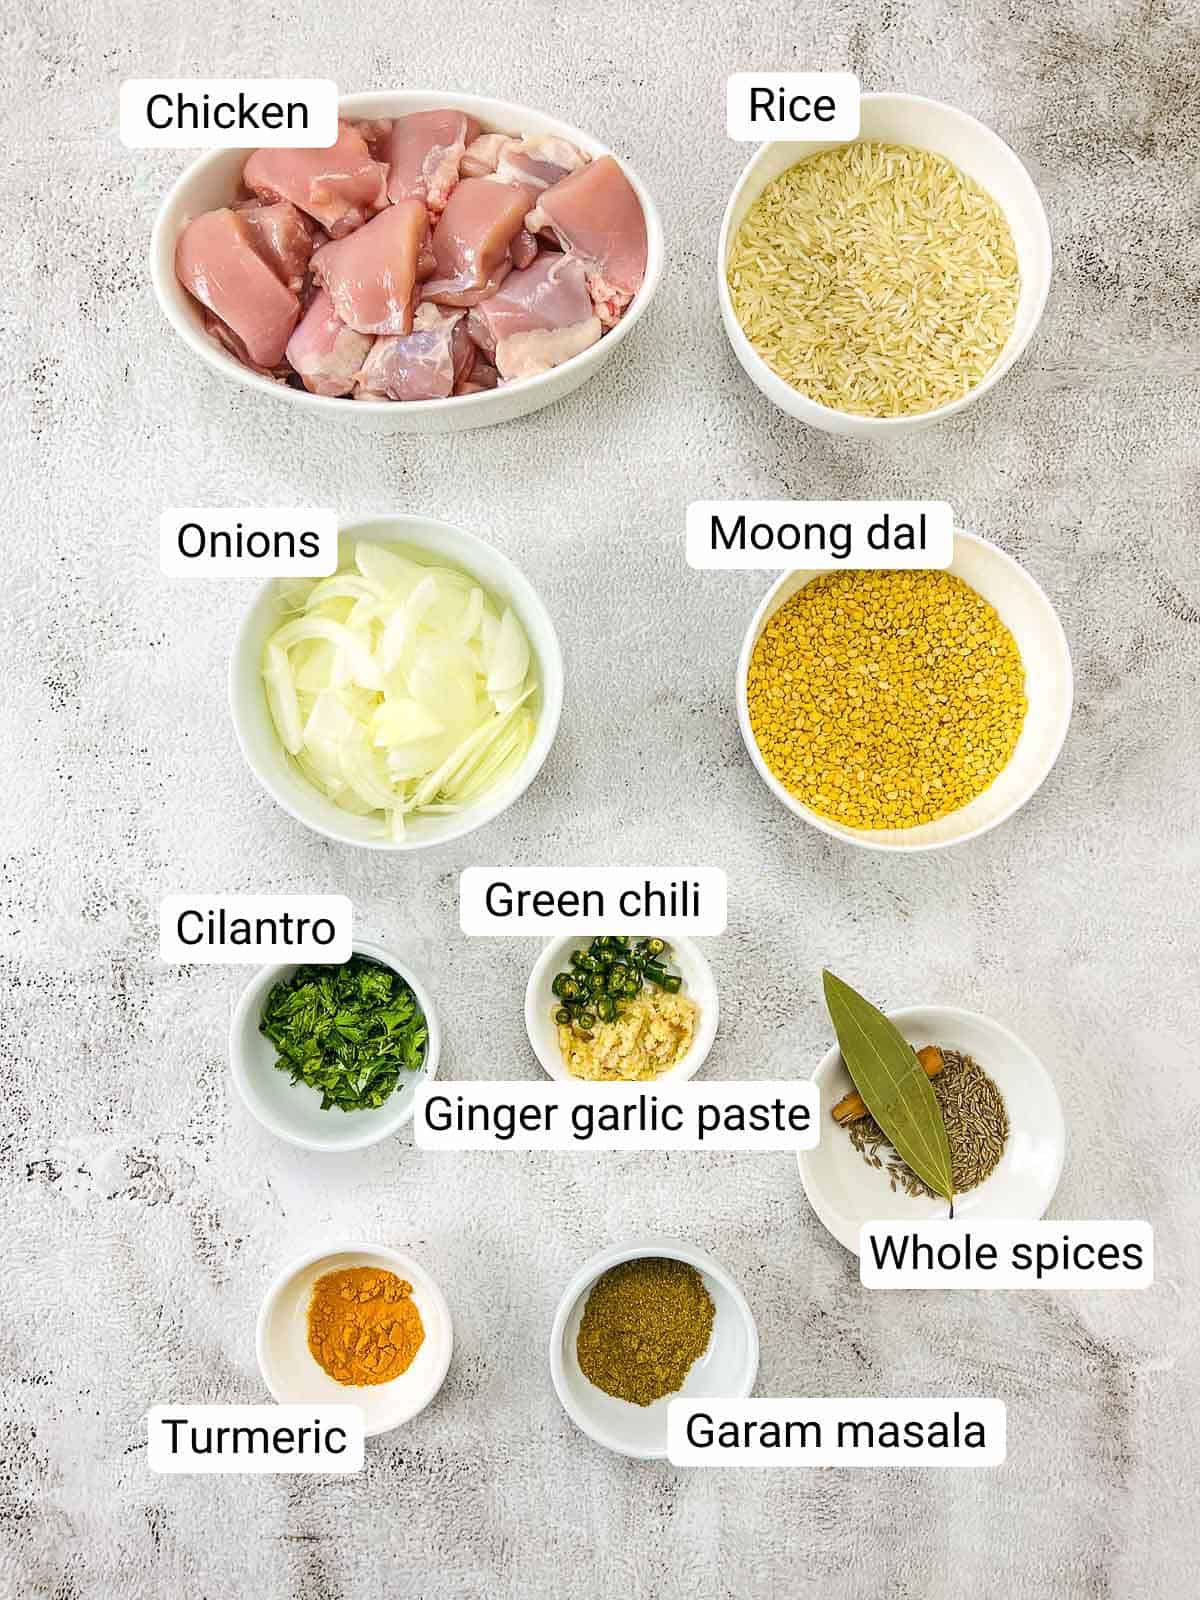 Ingredients to make chicken khichdi placed on a white surface.